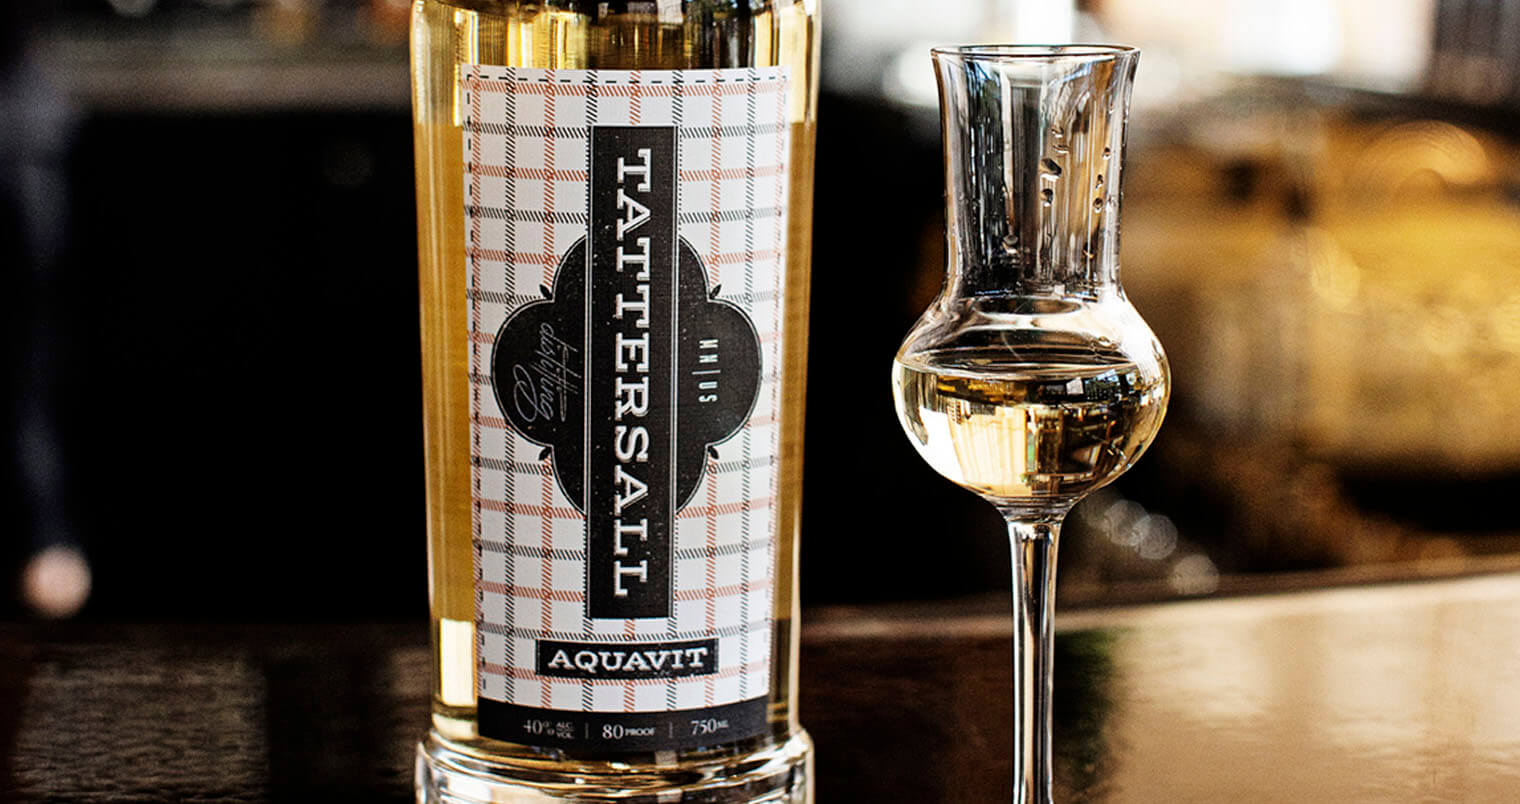 Tattersall Aquavit, bottle and glass on bar, featured image